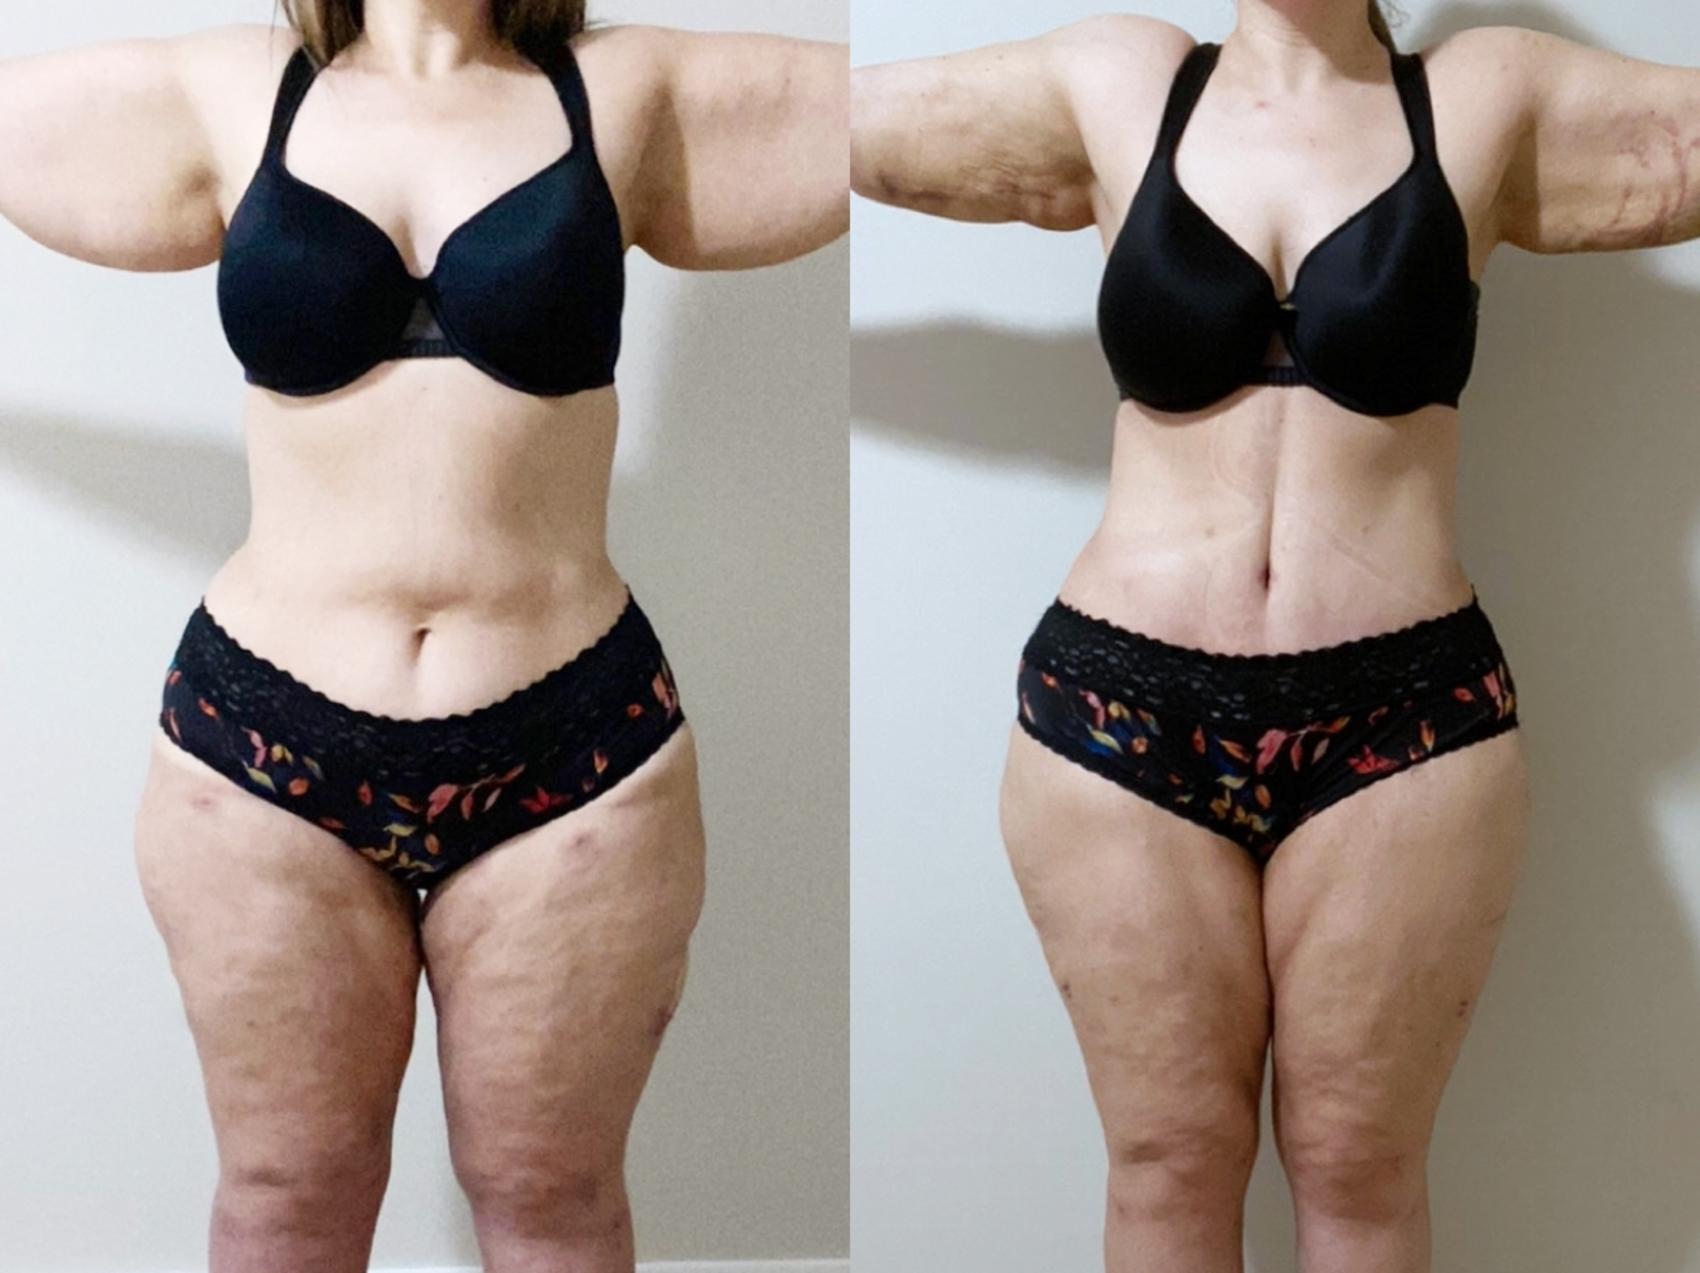 Our patient is THREE MONTHS post Plus Size Tummy Tuck ®! She is lookin